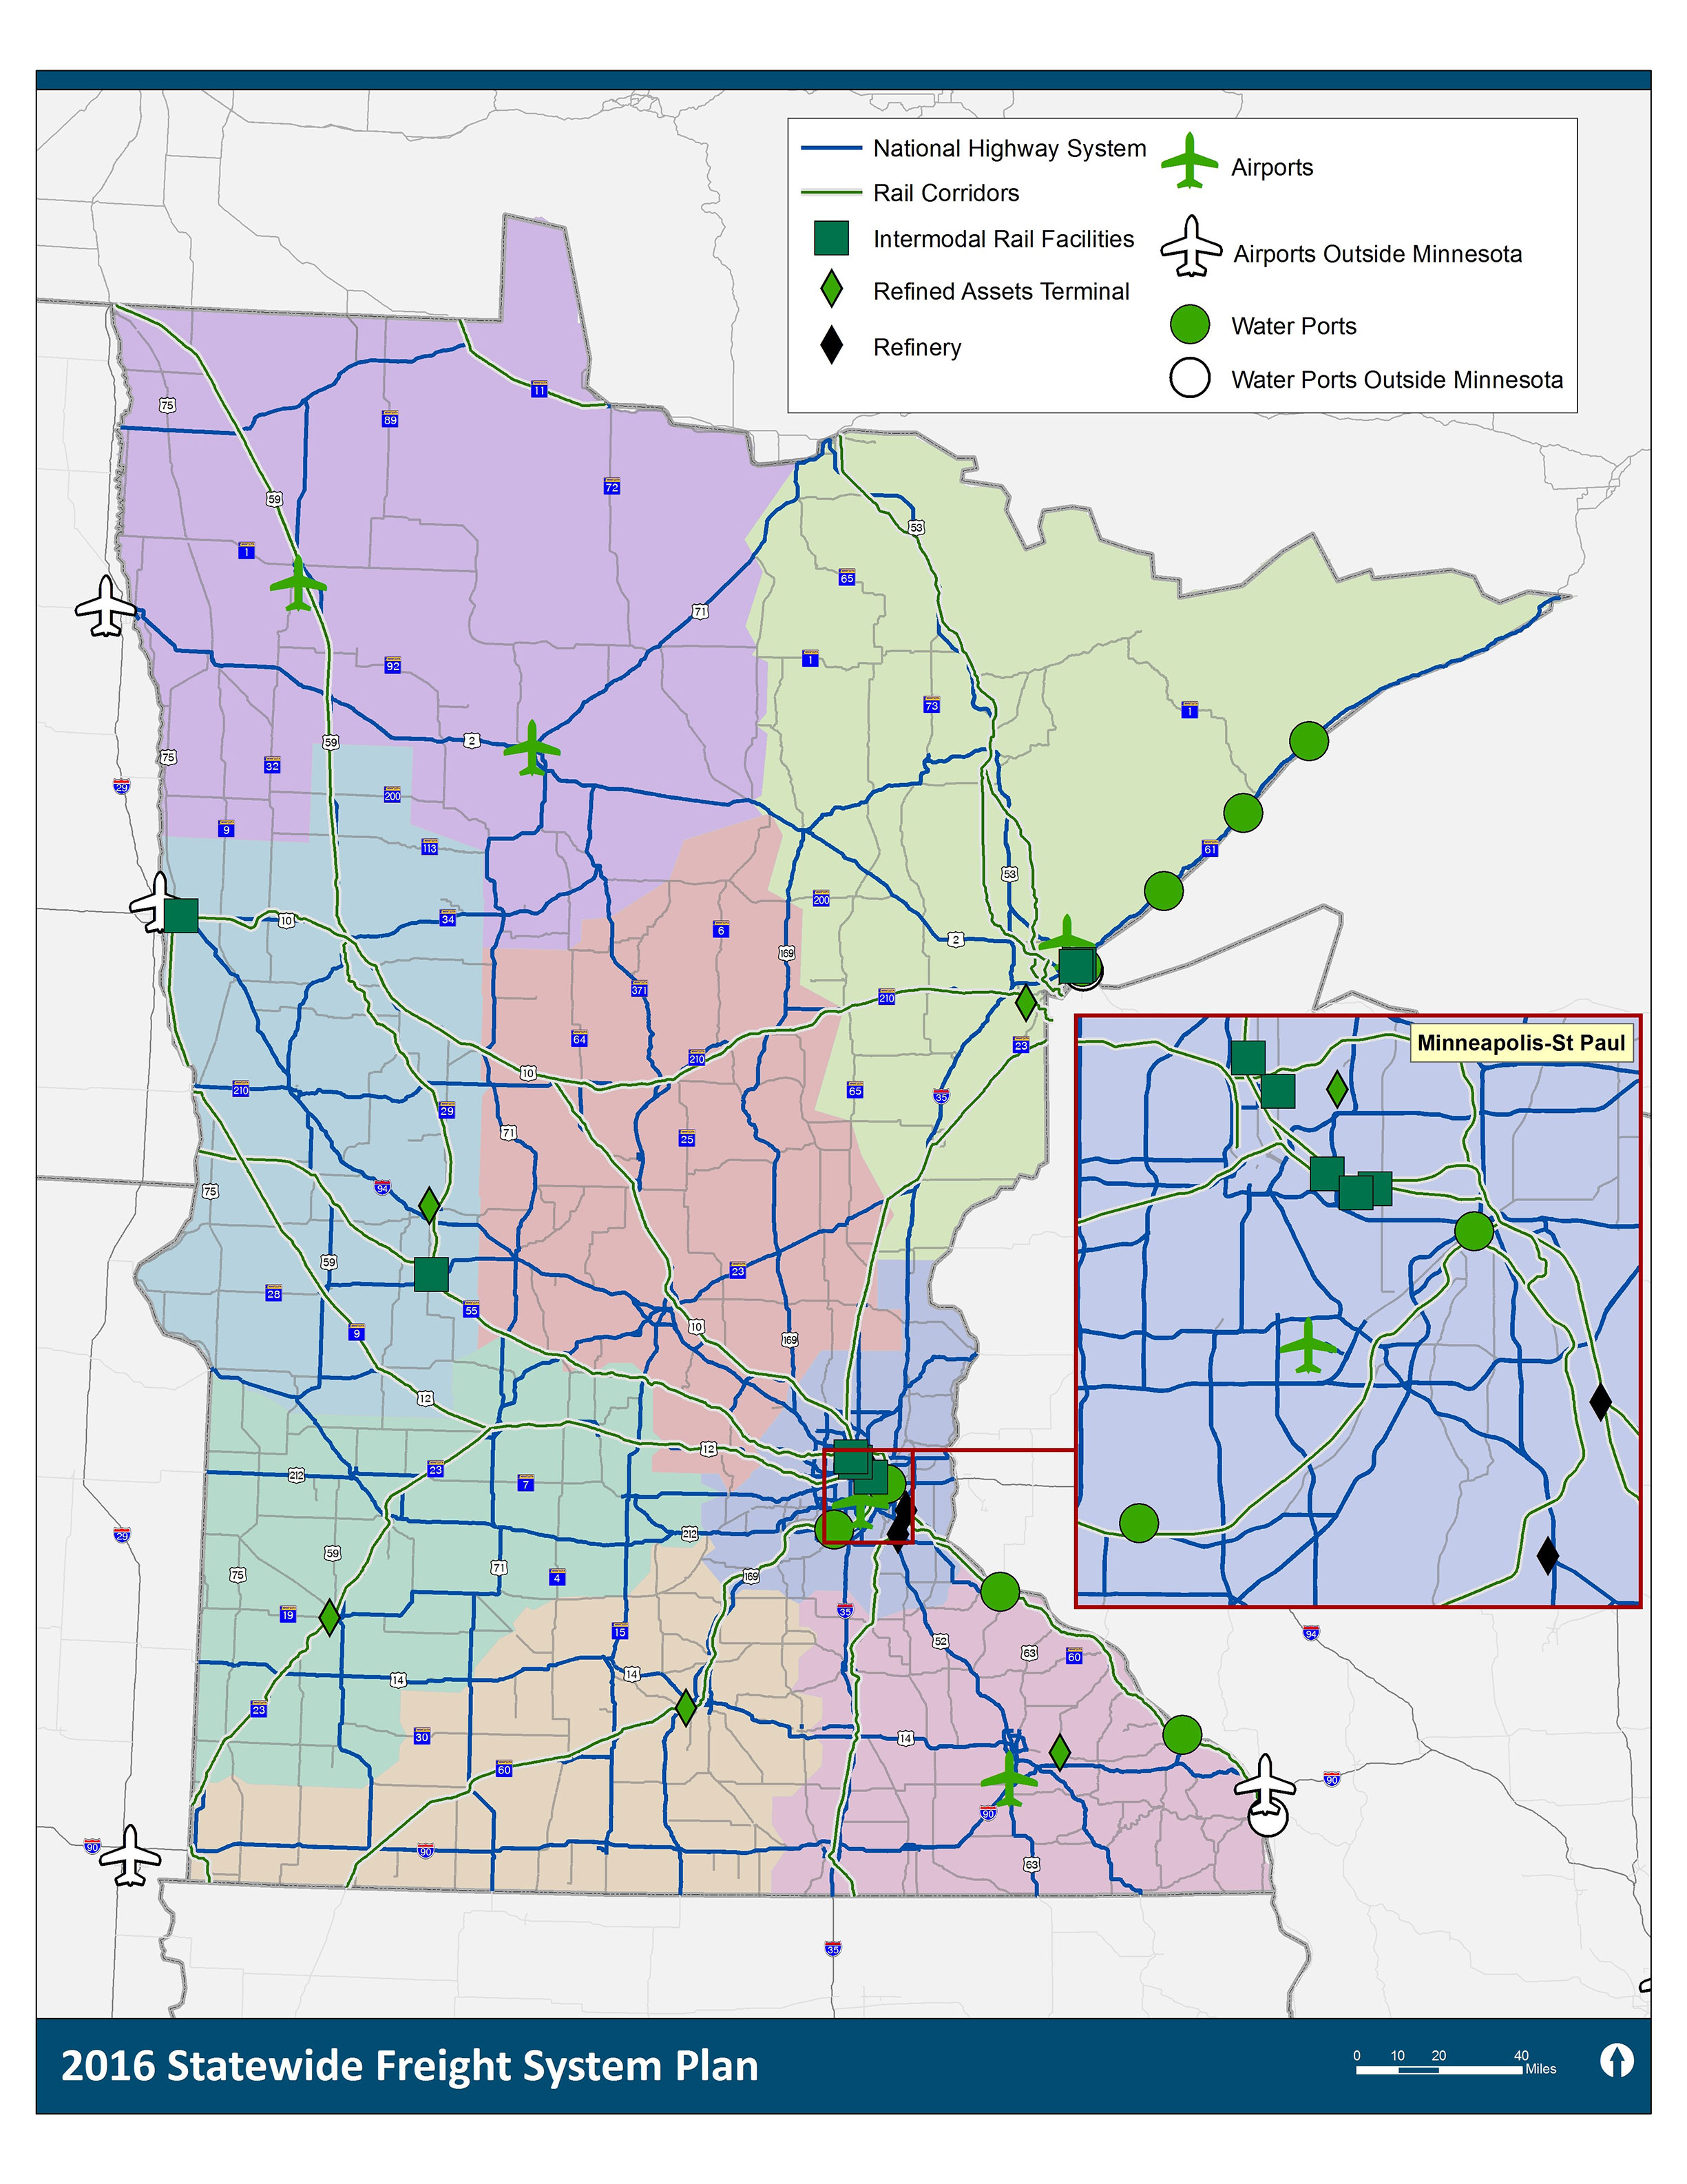 This is a map of Minnesota's Principal Freight Network. All modes are depicted, overlaid on an image of the state, with each MnDOT District identified by a different color.